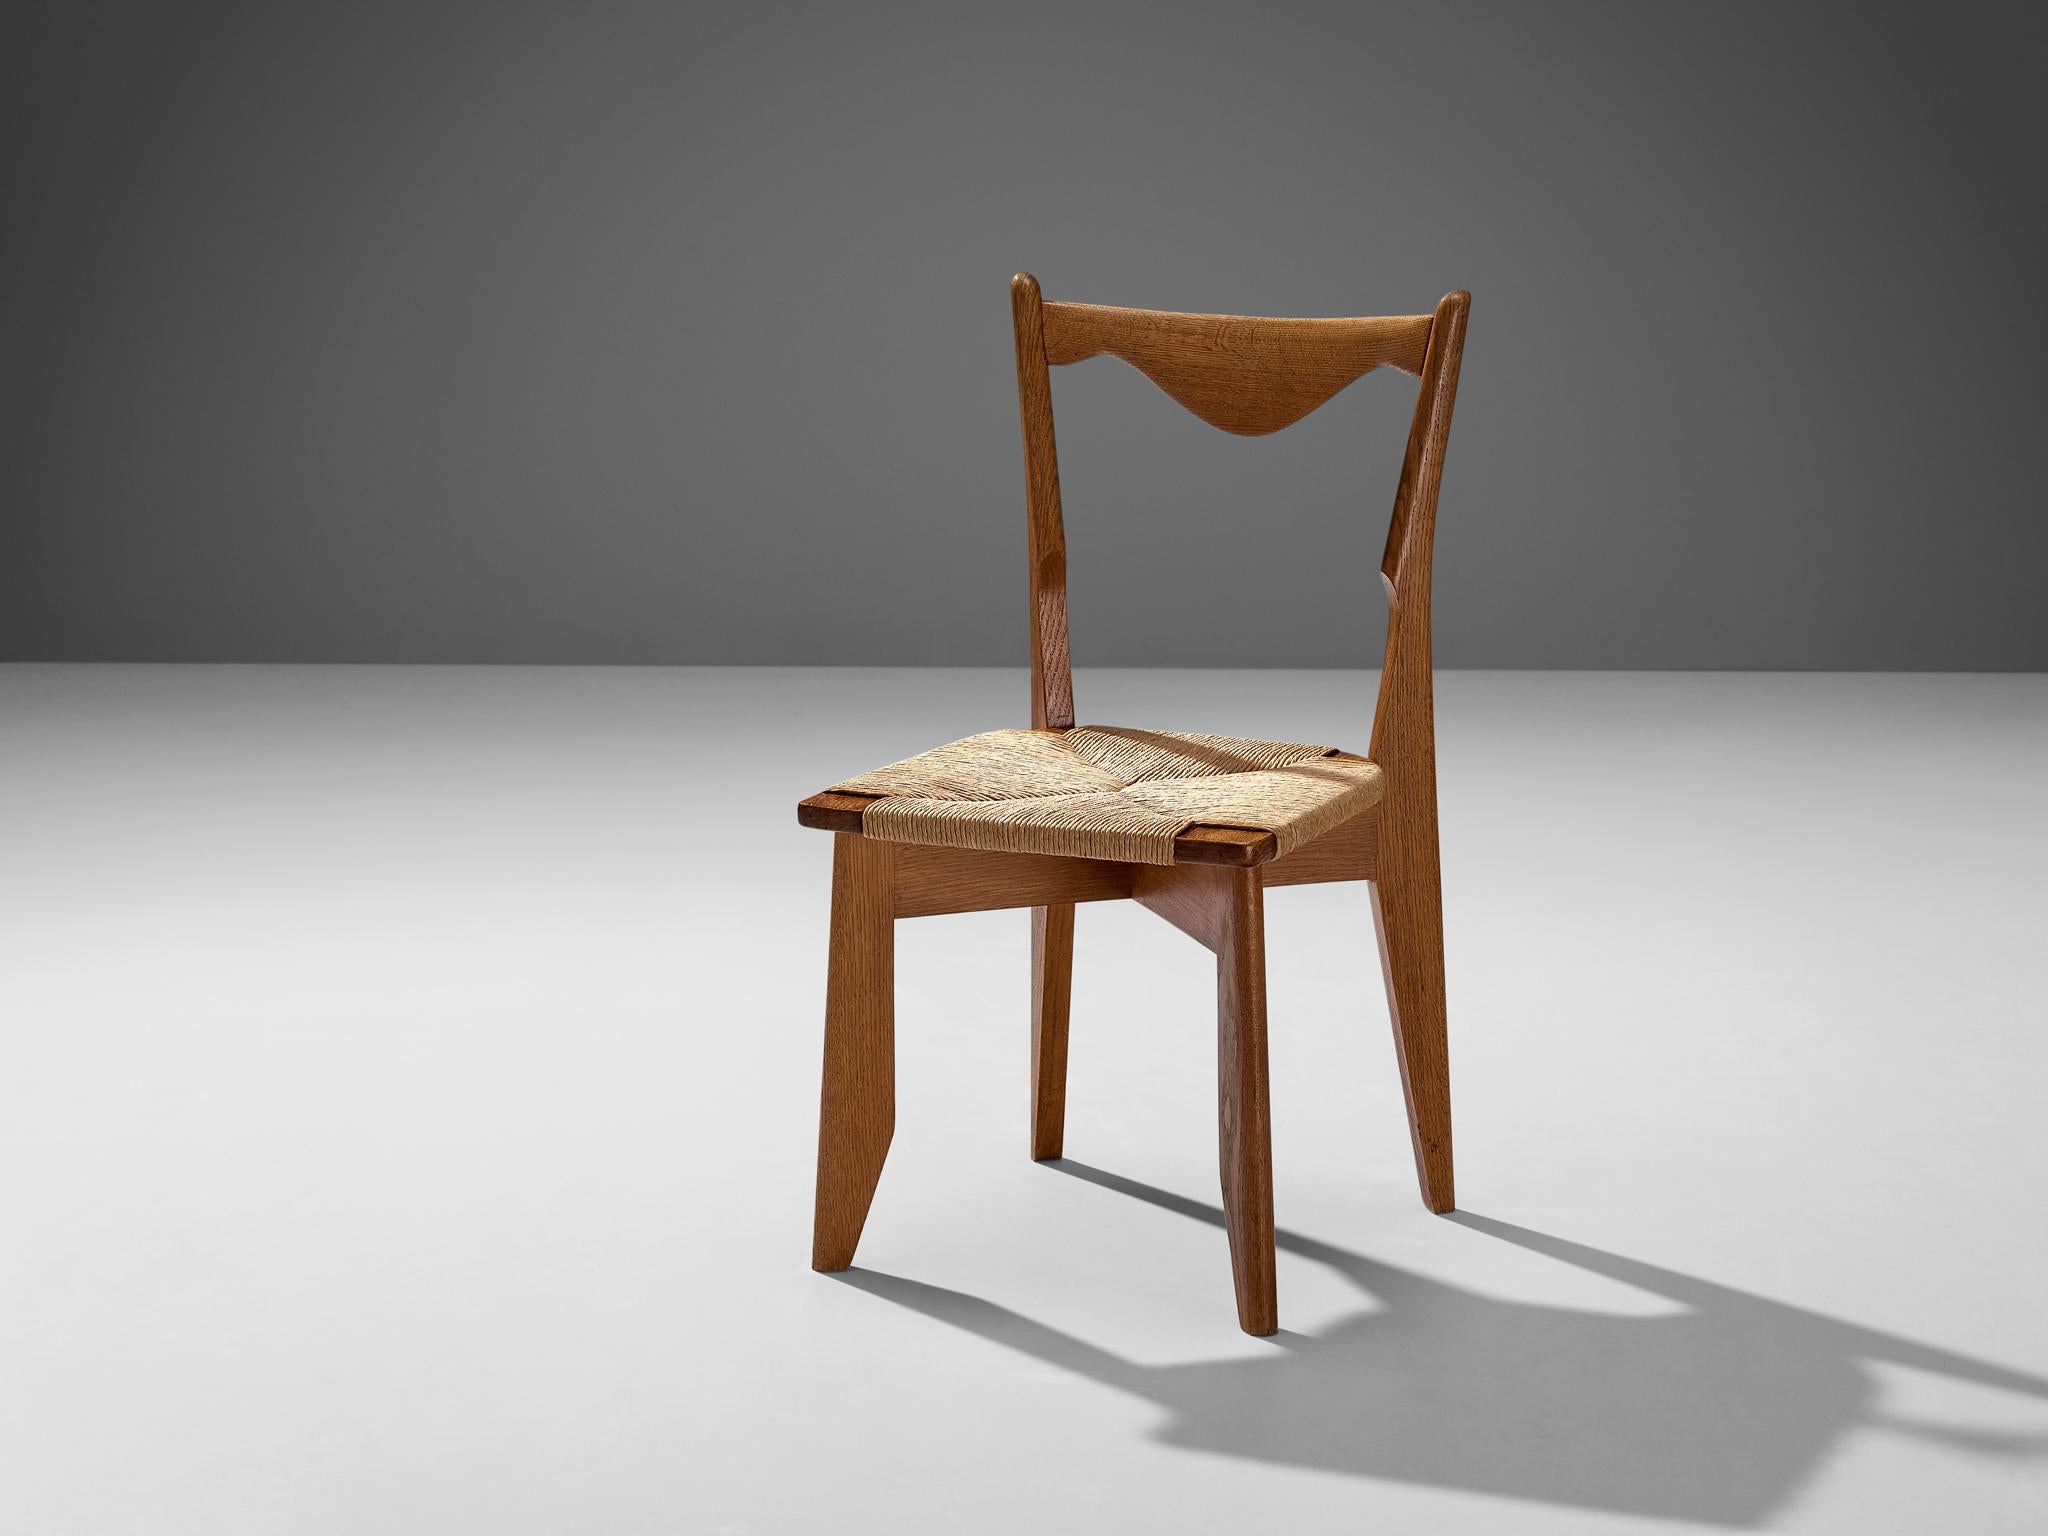 Guillerme et Chambron for Votre Maison, 'Thibault' dining chair, oak, papercord, France, 1960s

Elegant chair in solid oak by Guillerme and Chambron. This chair shows a characteristic frame by this French designer duo known for their oak sculptural